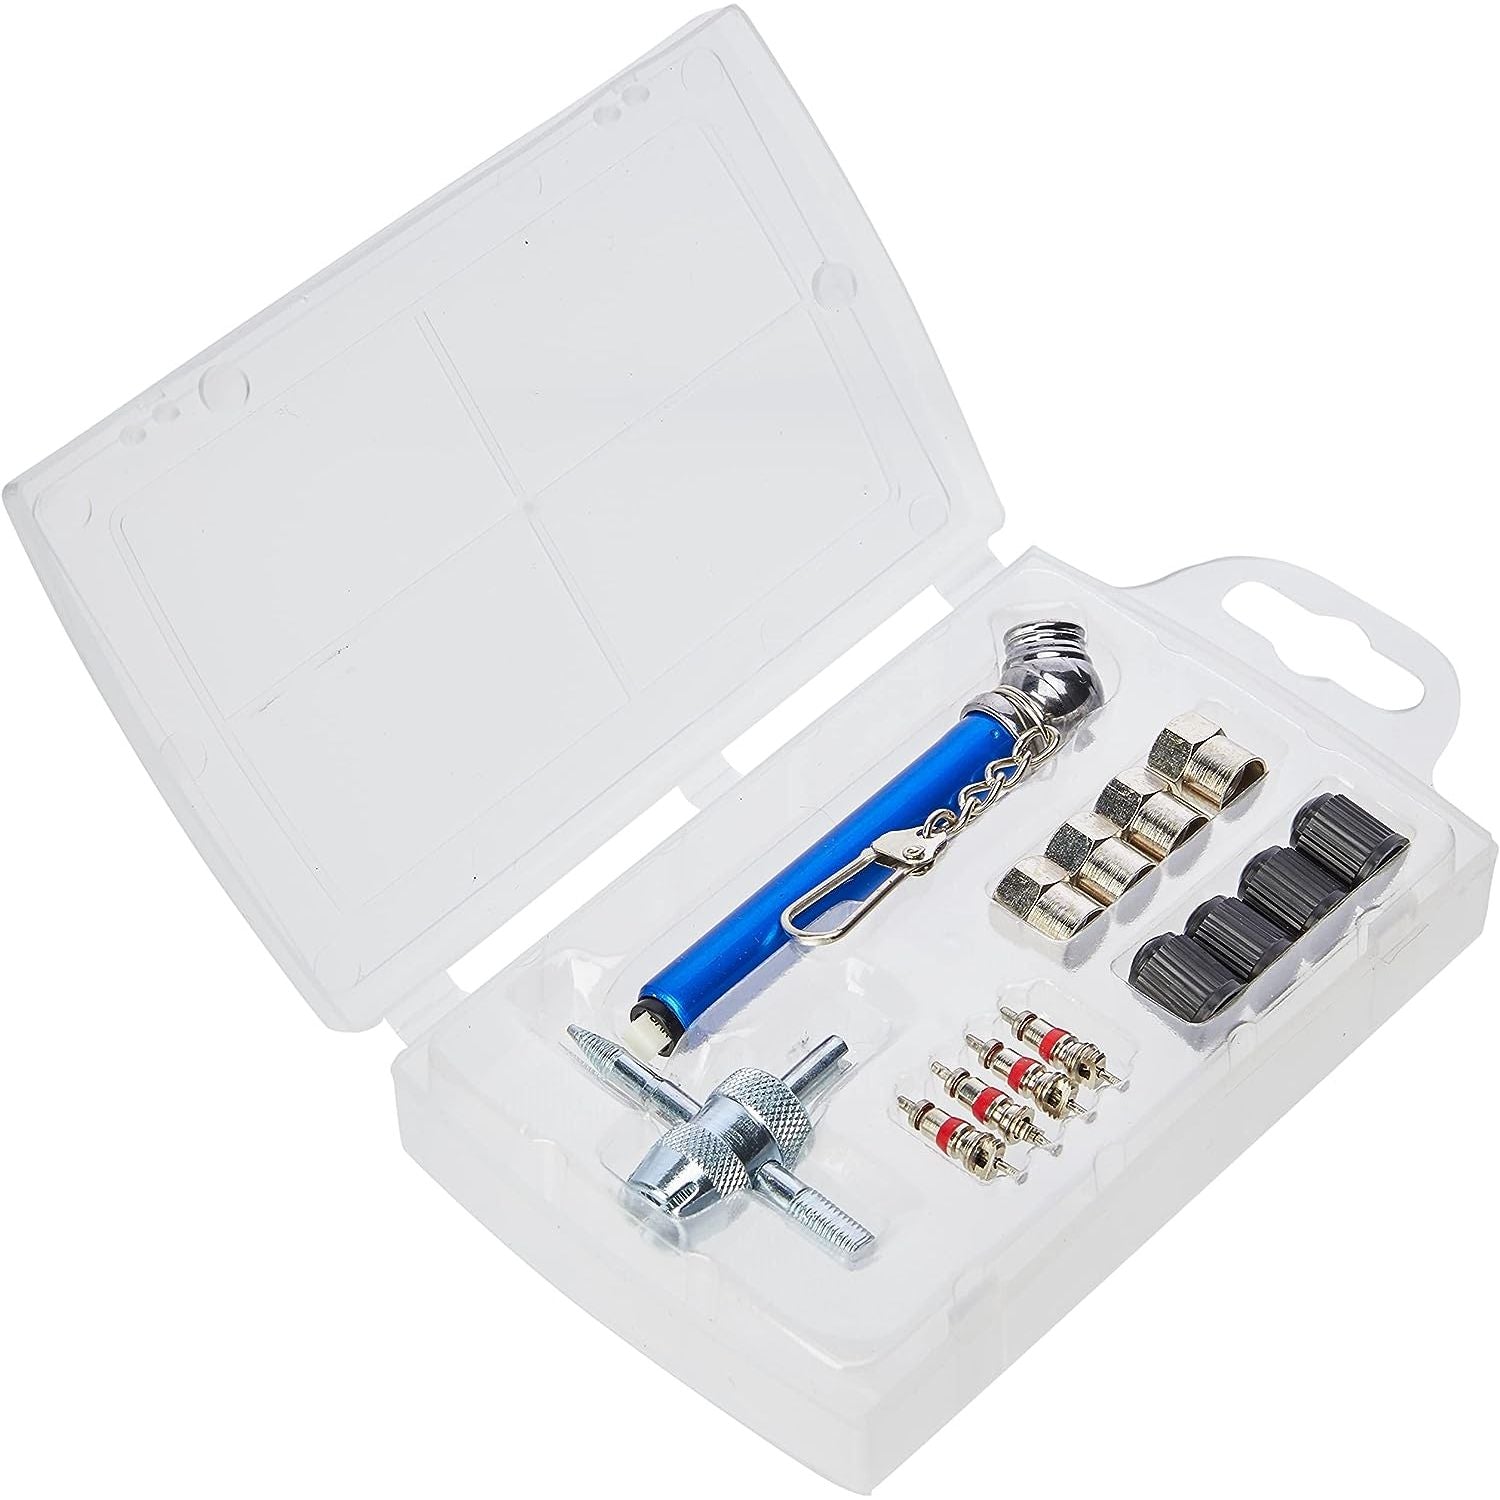 Tyre Valve Repair Kit - South East Clearance Centre